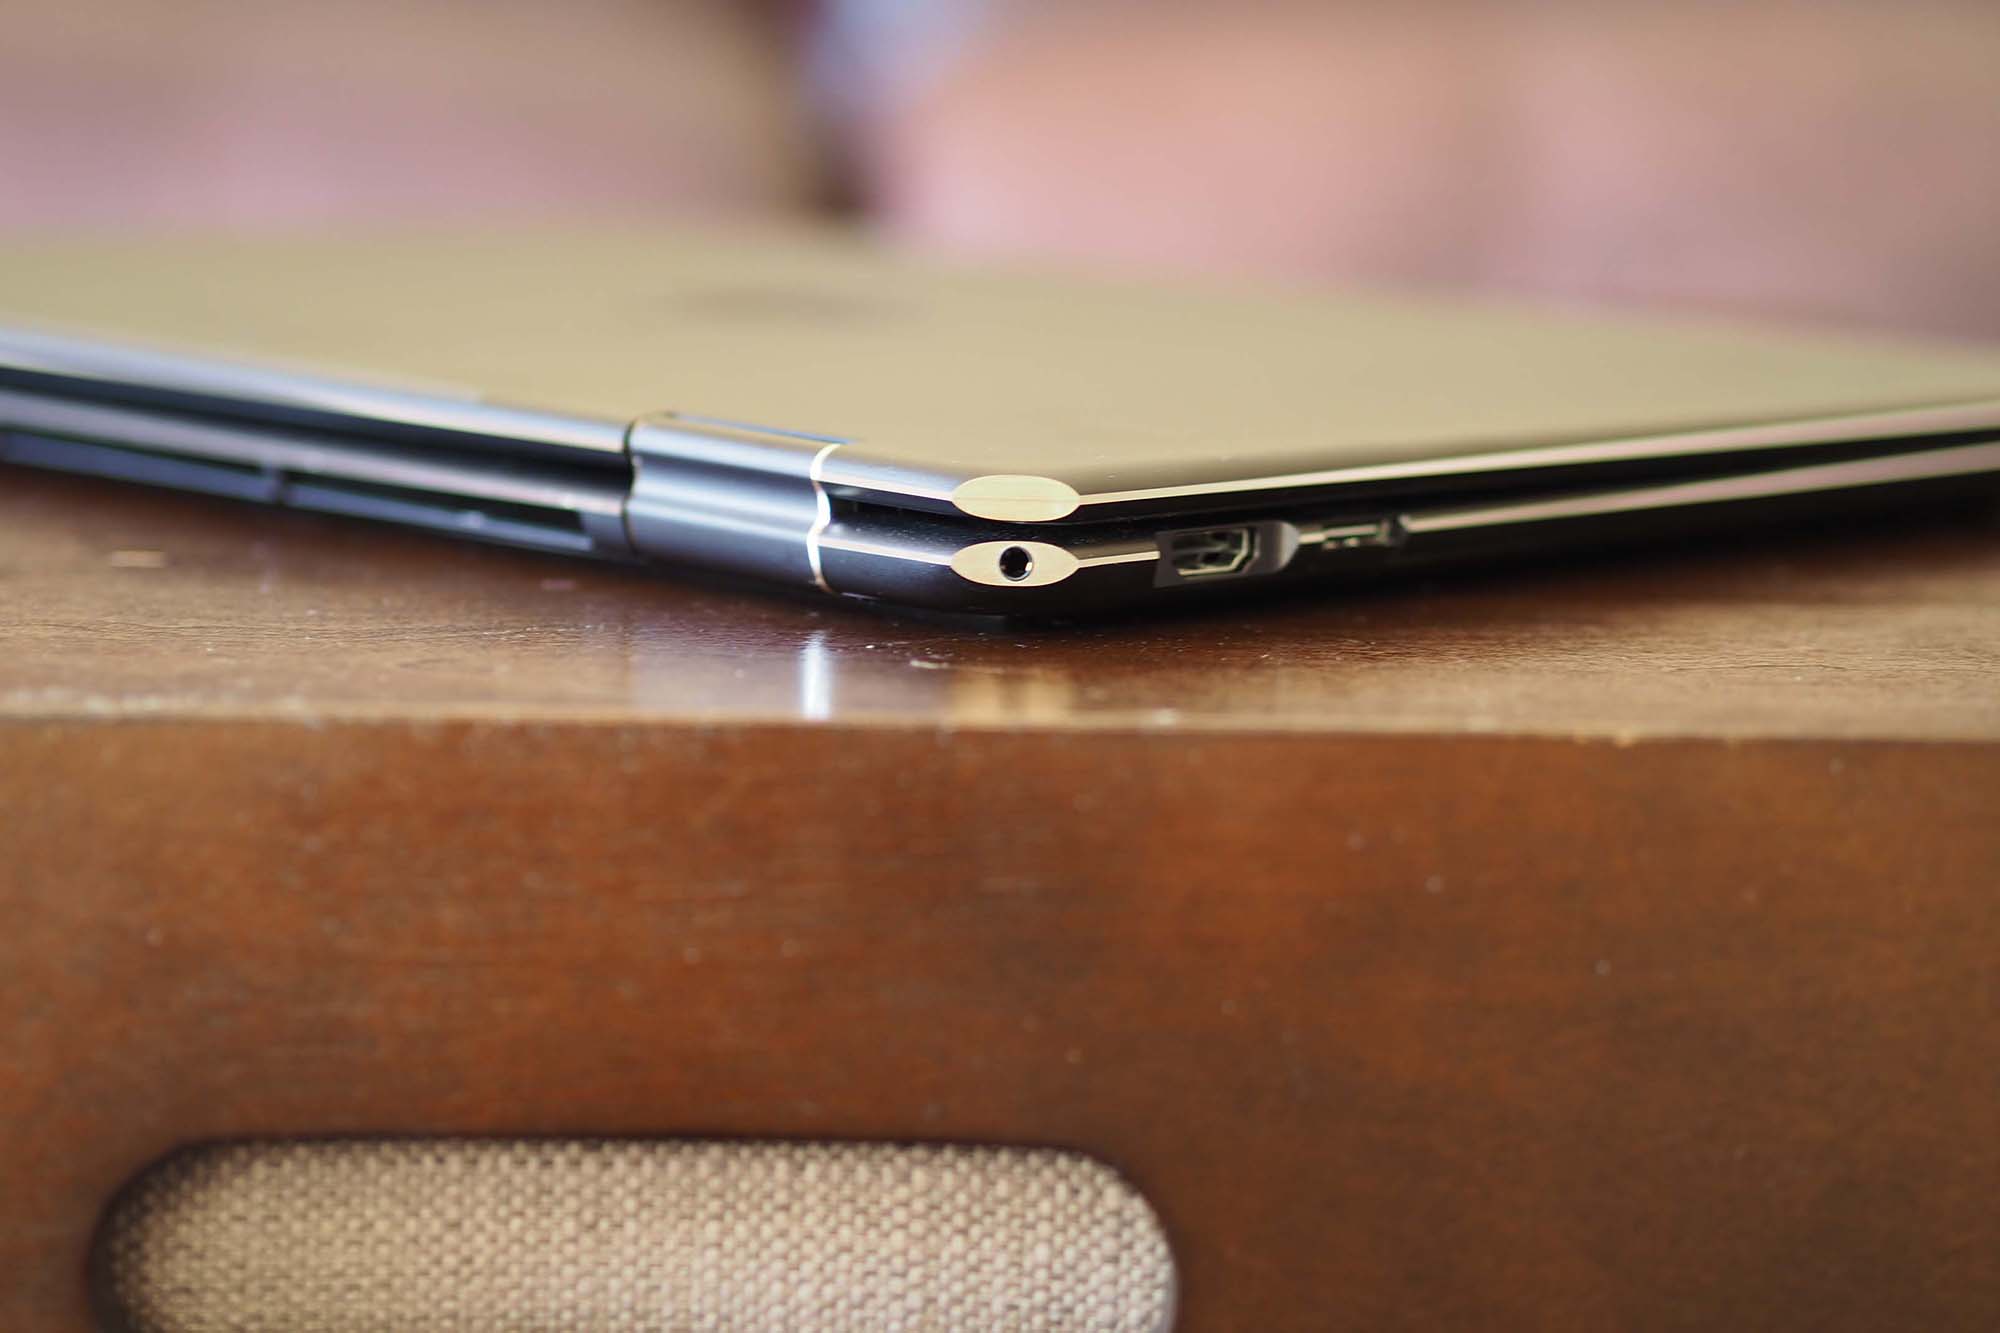 HP Spectre x360 16 review